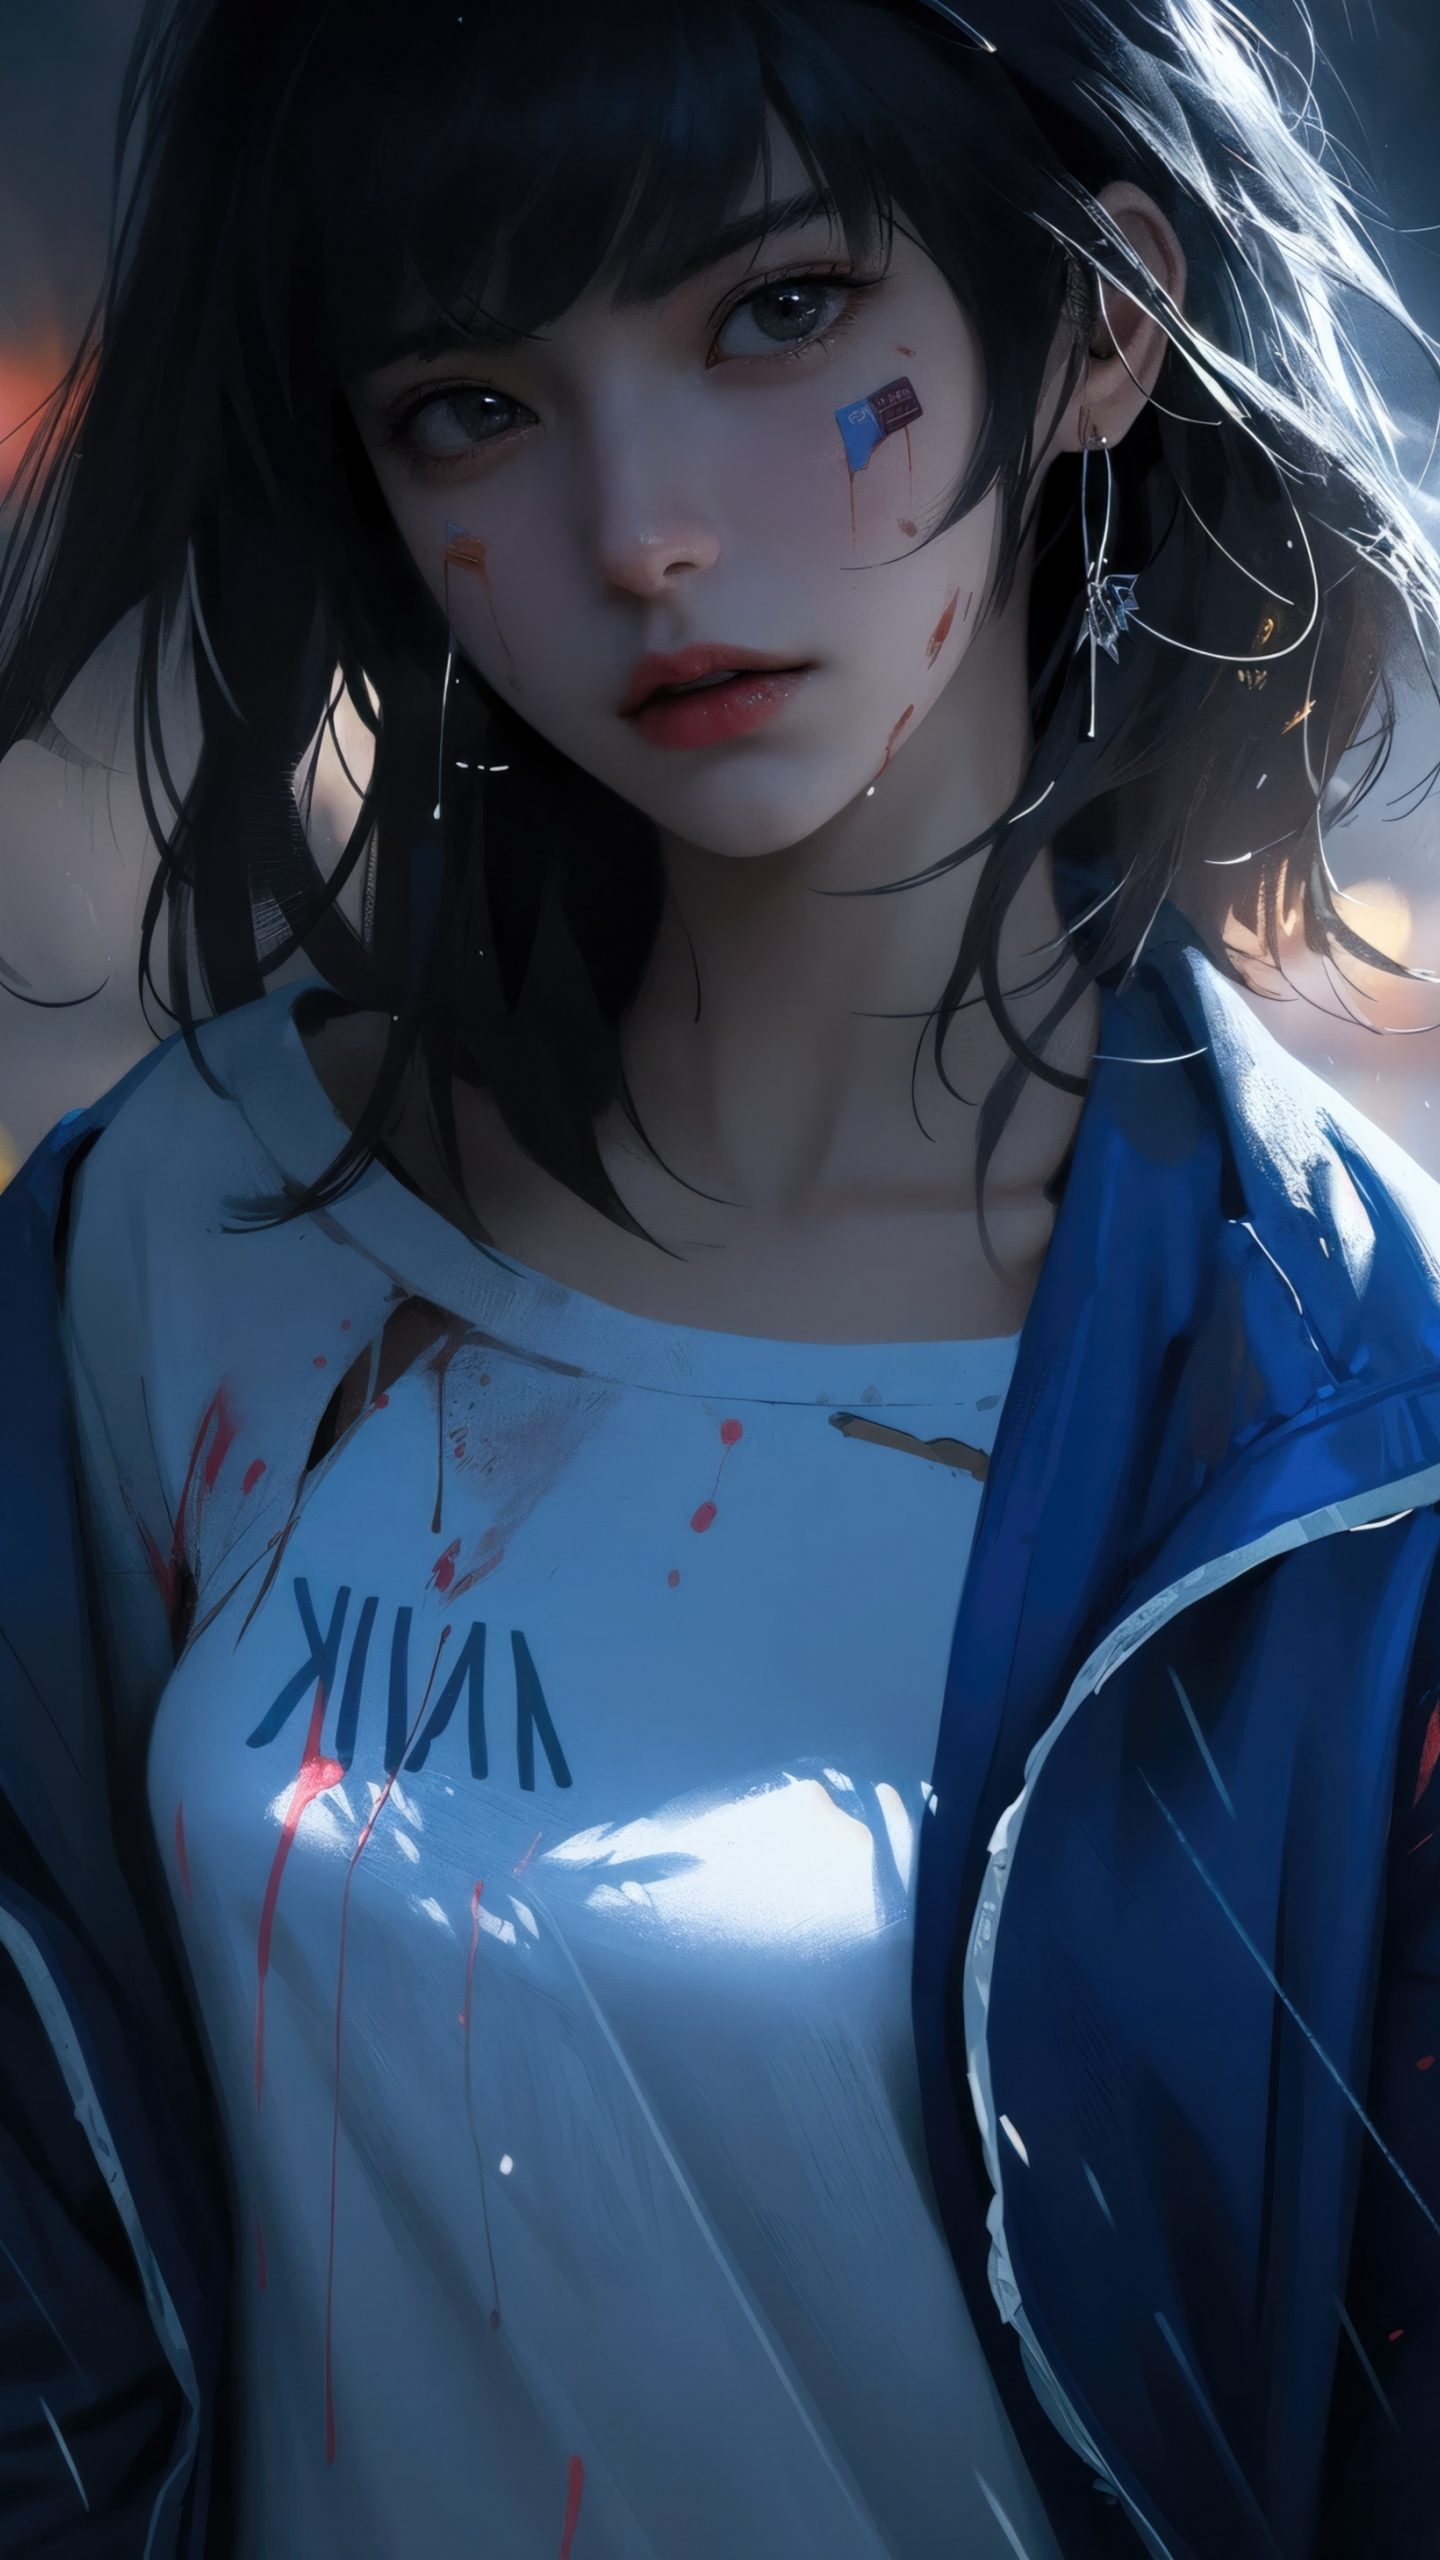 Download A unique fanart of an Anime character. Wallpaper